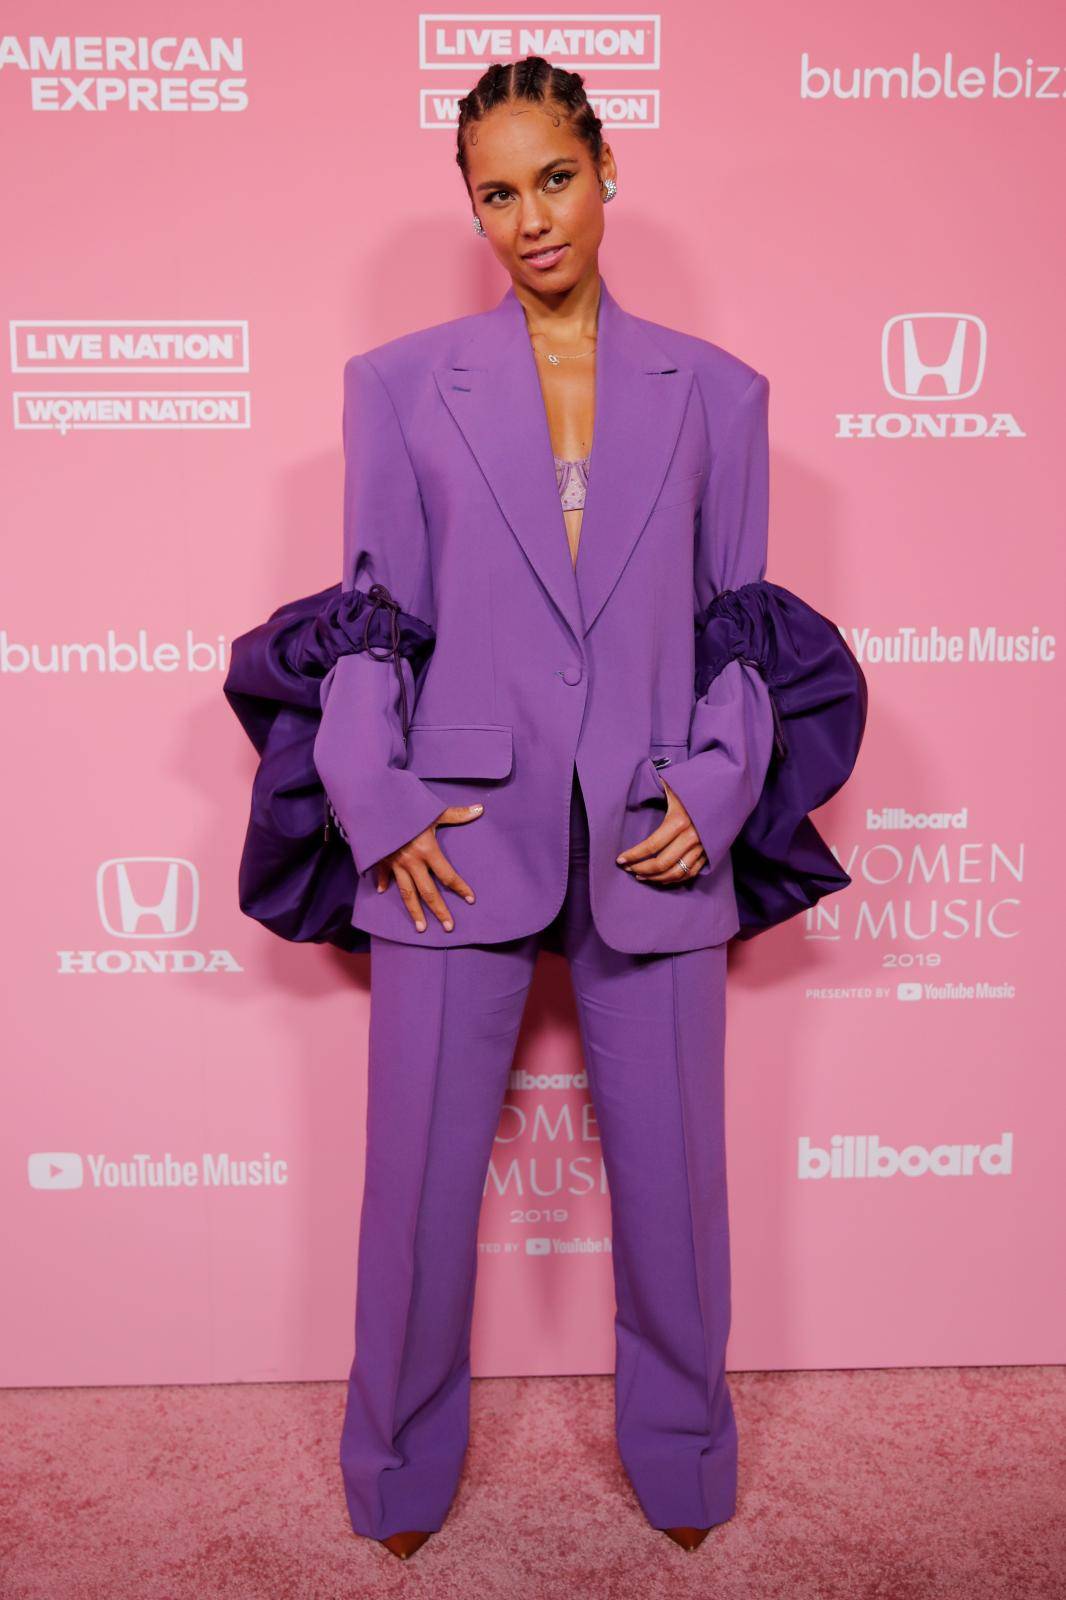 Alicia Keys arrives on the red carpet for the "Billboard Women in Music" event in Los Angeles